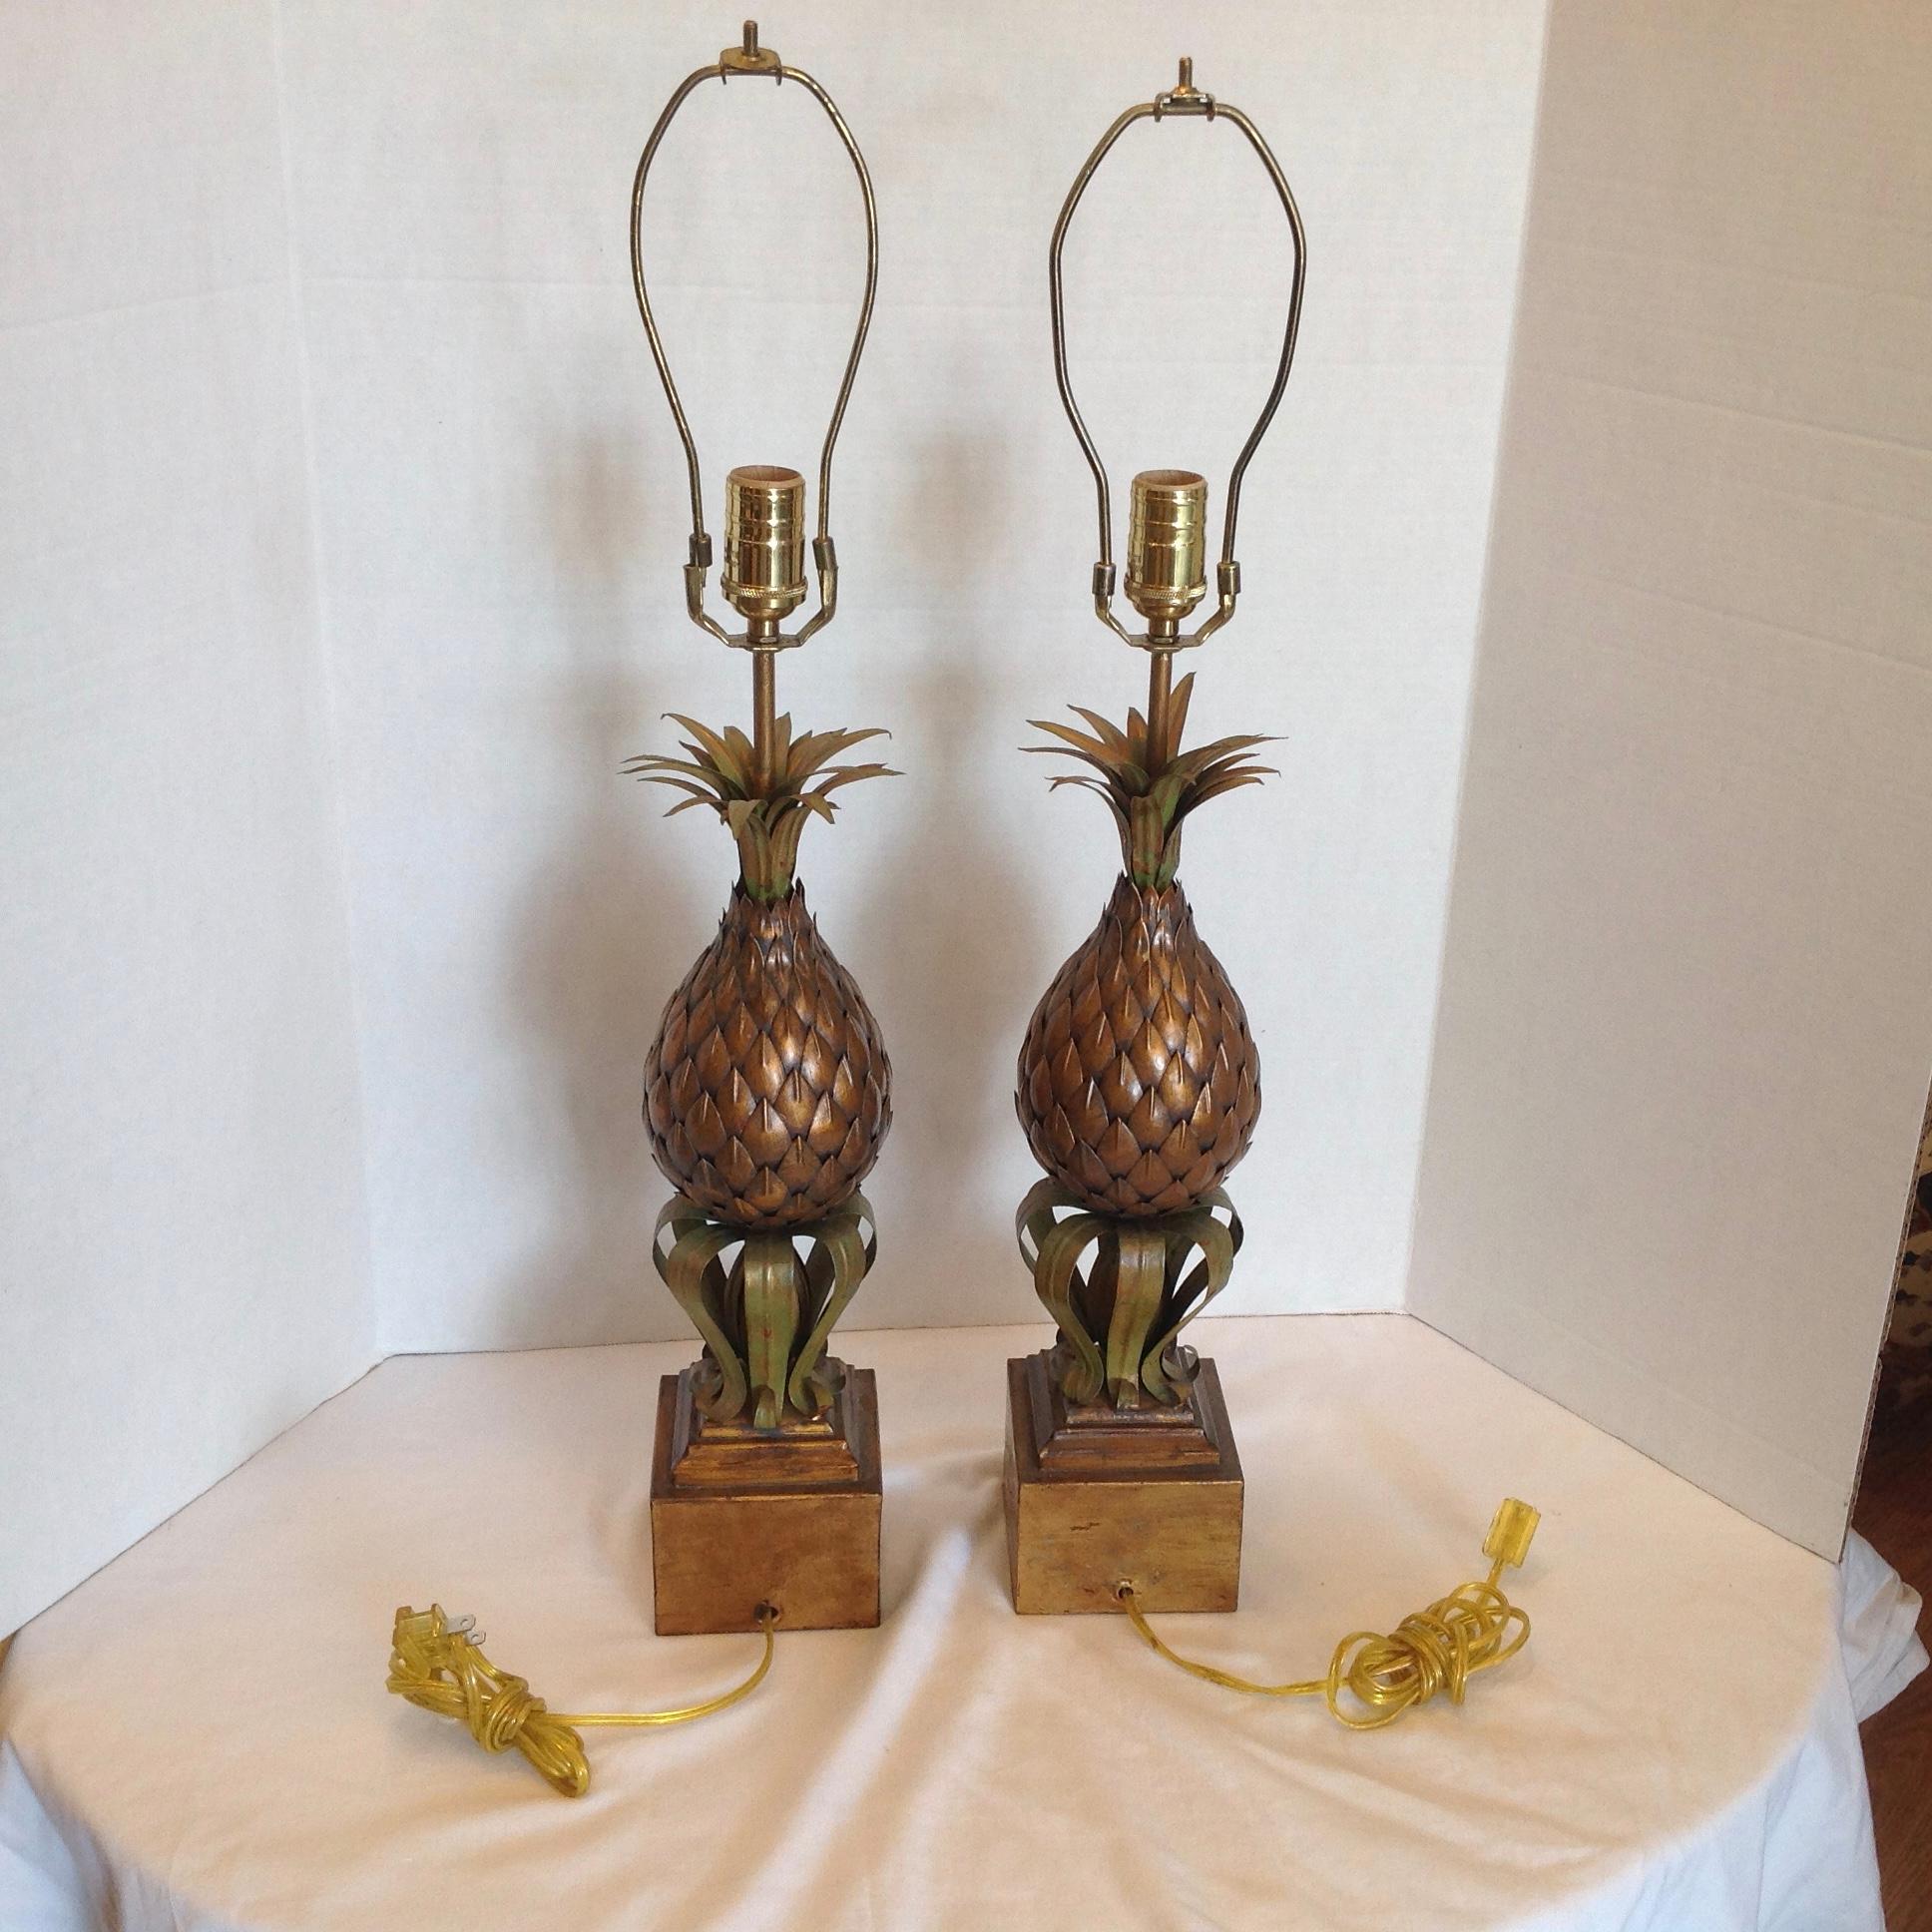 Mid-Century Modern Pair of Midcentury Tole Pineapple Lamps For Sale